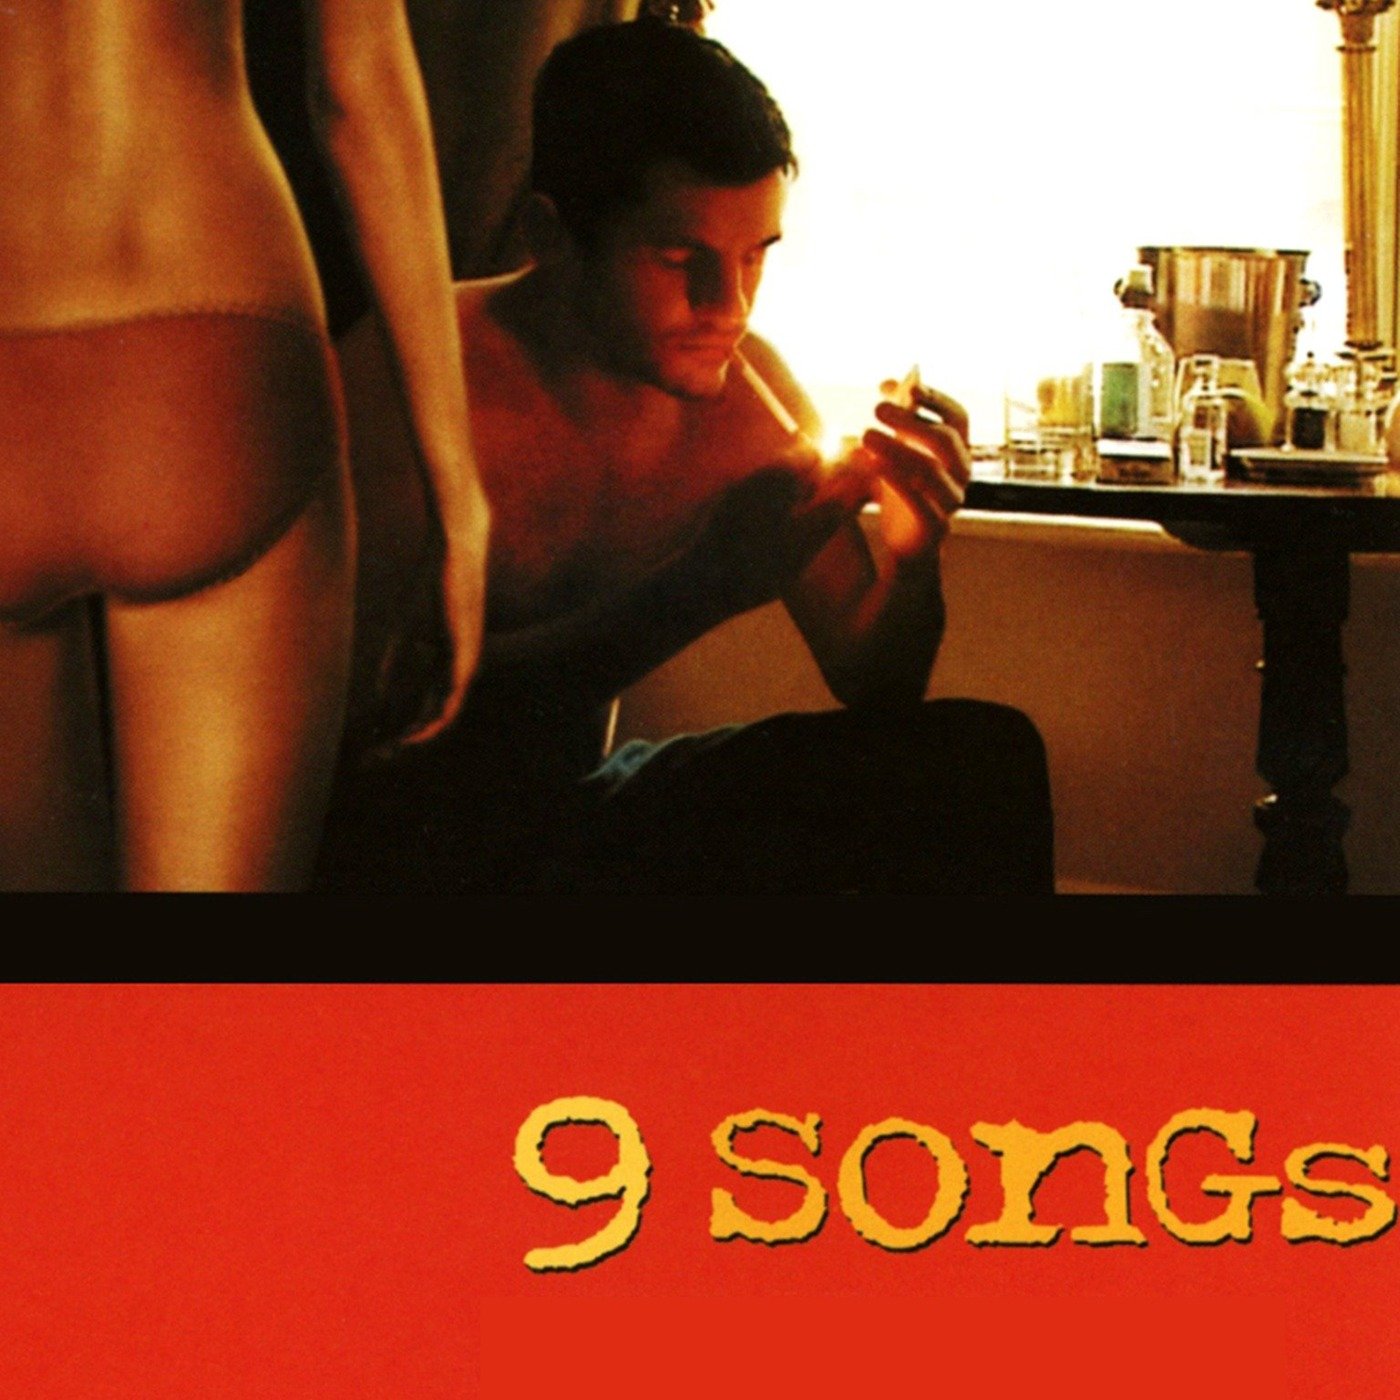 danielle ridgway recommends 9 songs full movie watch online pic